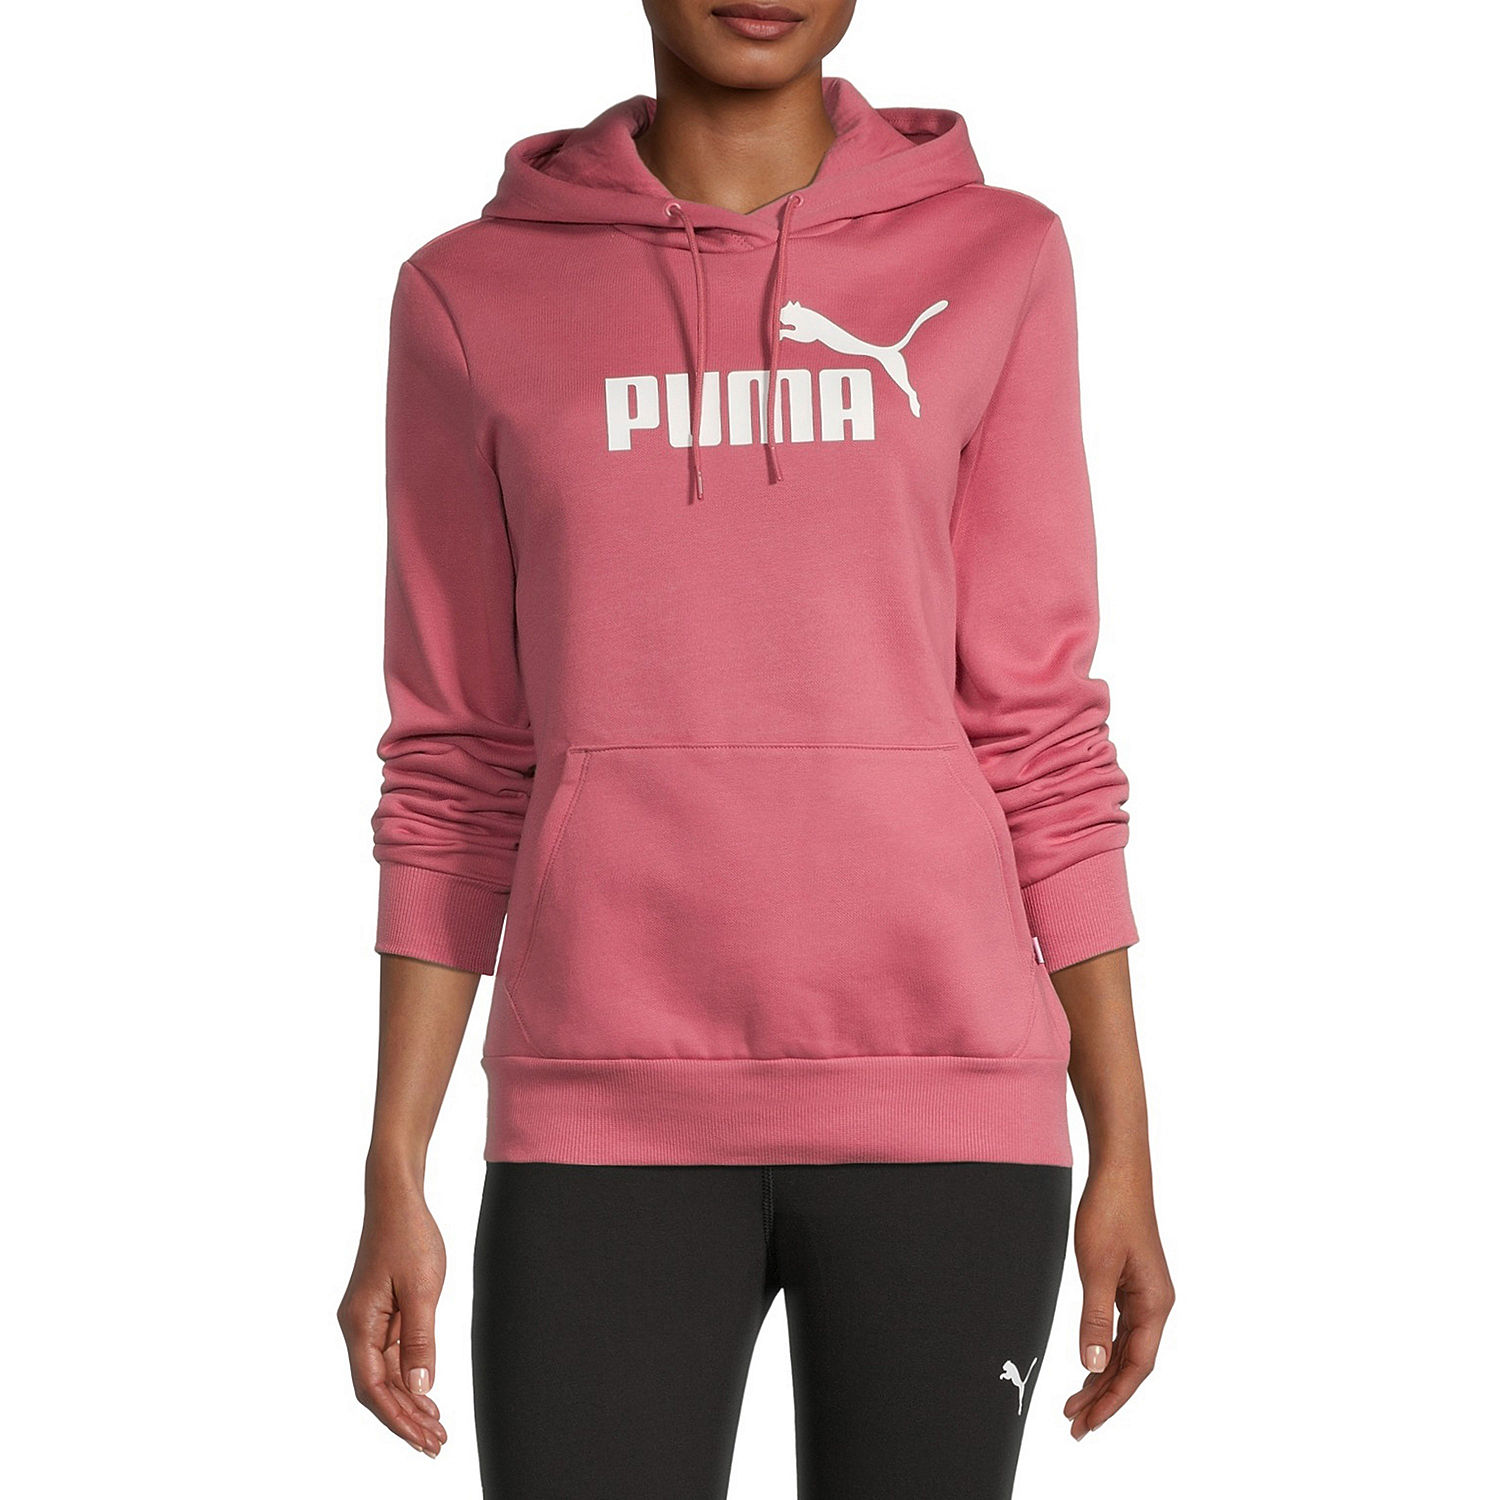 JCPenney: PUMA Graphic Hoodies on sale for $19.39